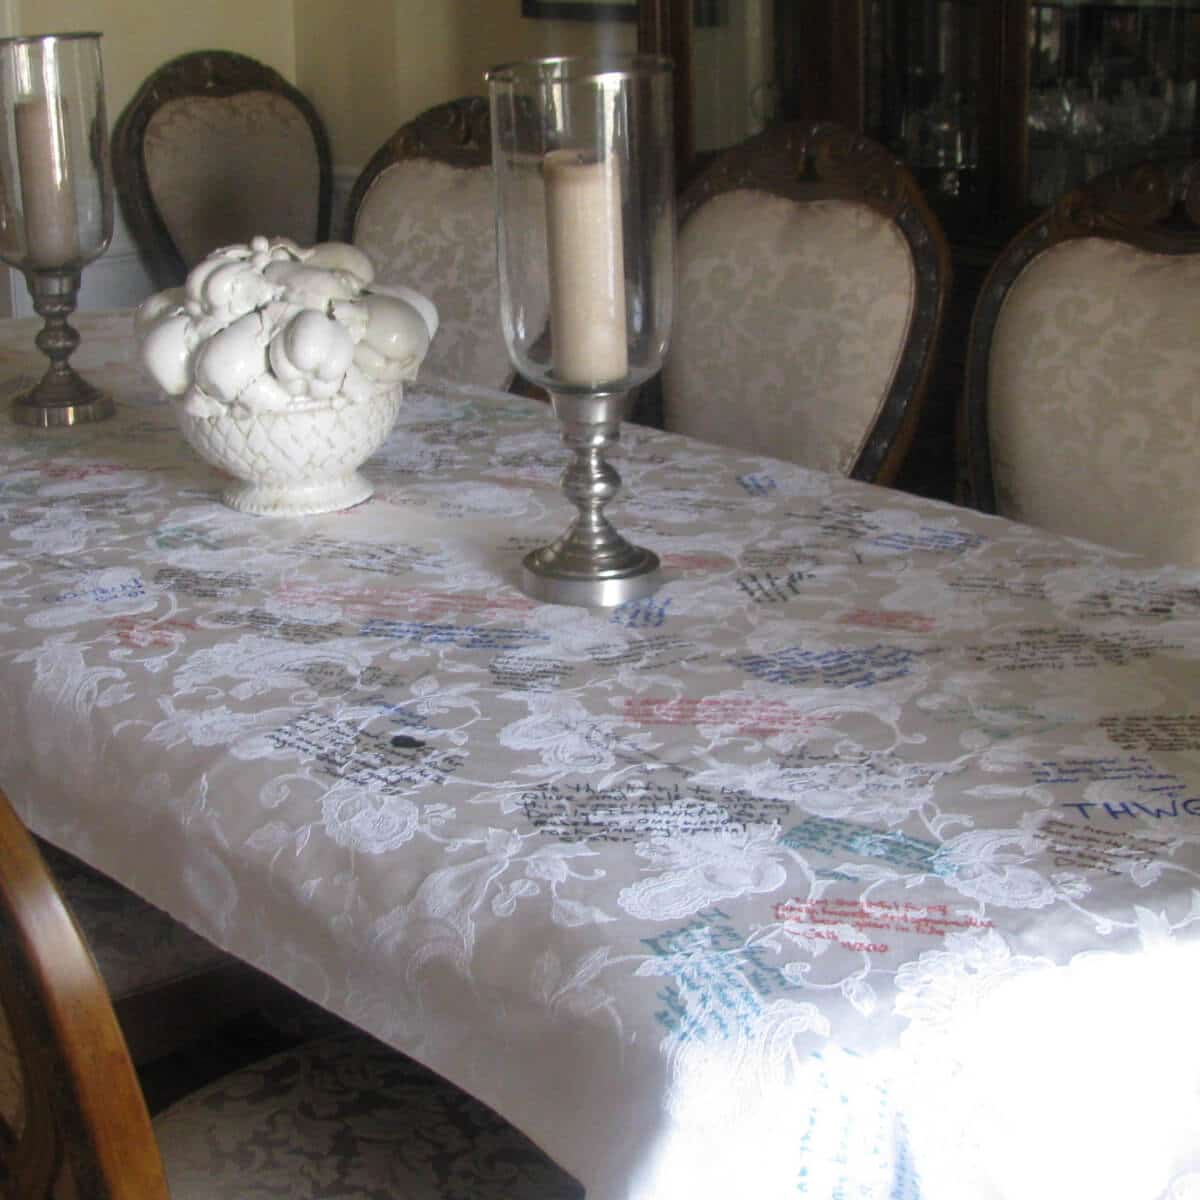 Dining room table covered with a tablecloth.